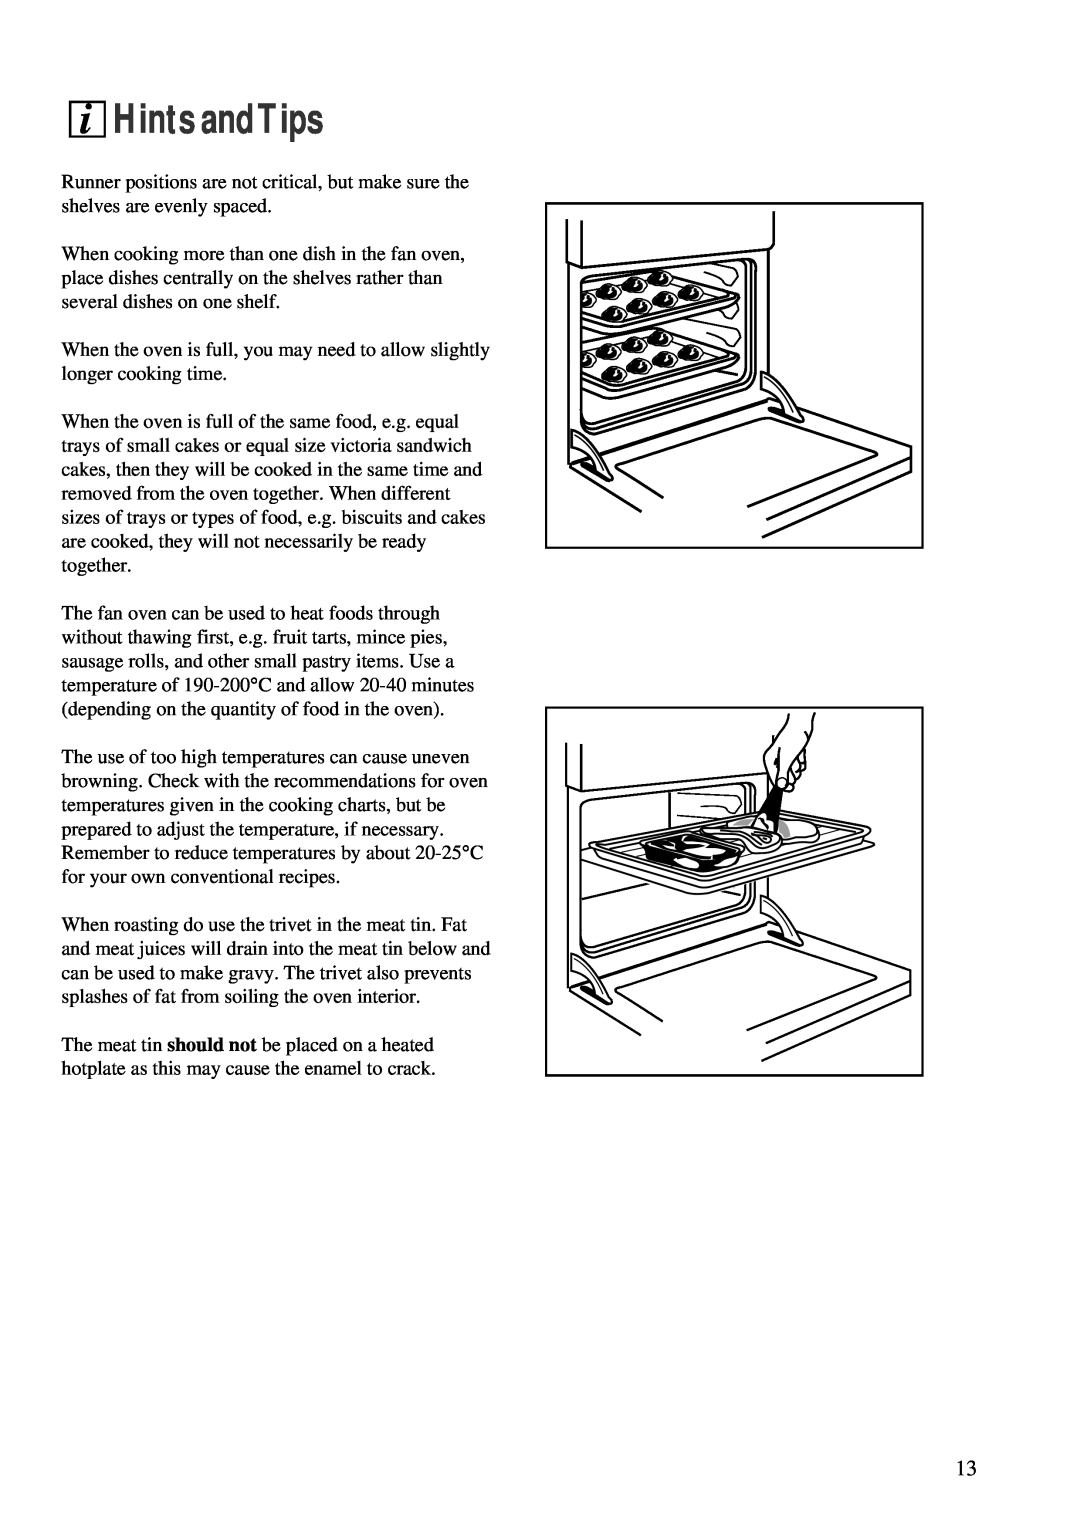 Zanussi ZBF 863 manual Hints andTips, Runner positions are not critical, but make sure the shelves are evenly spaced 